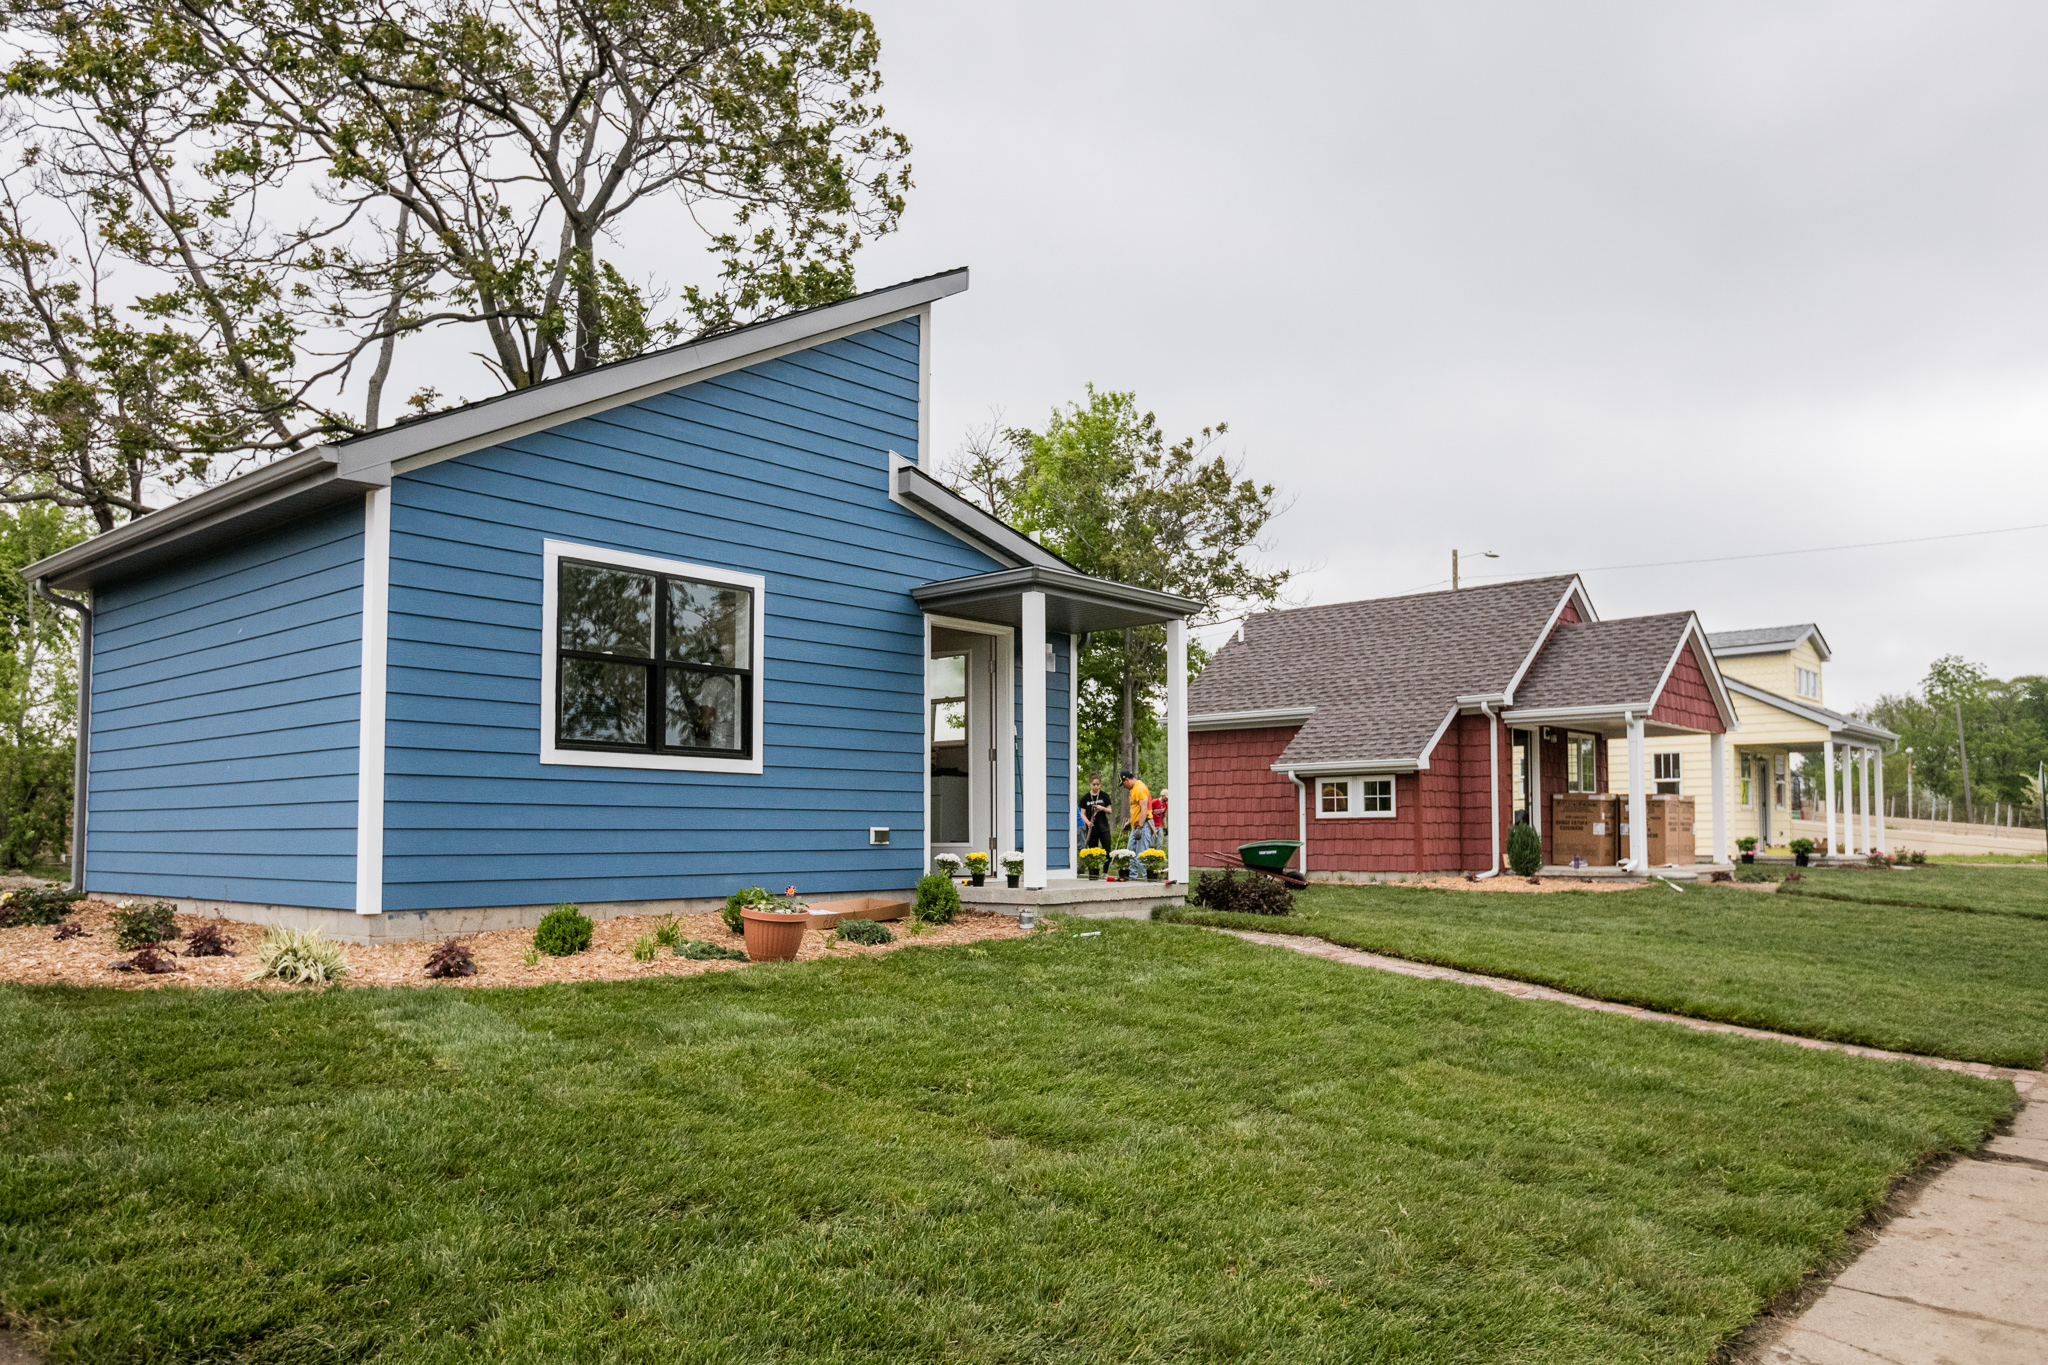 Three small single-story homes, colored blue, red, and white, sit in a row behind well-mowed lawns.